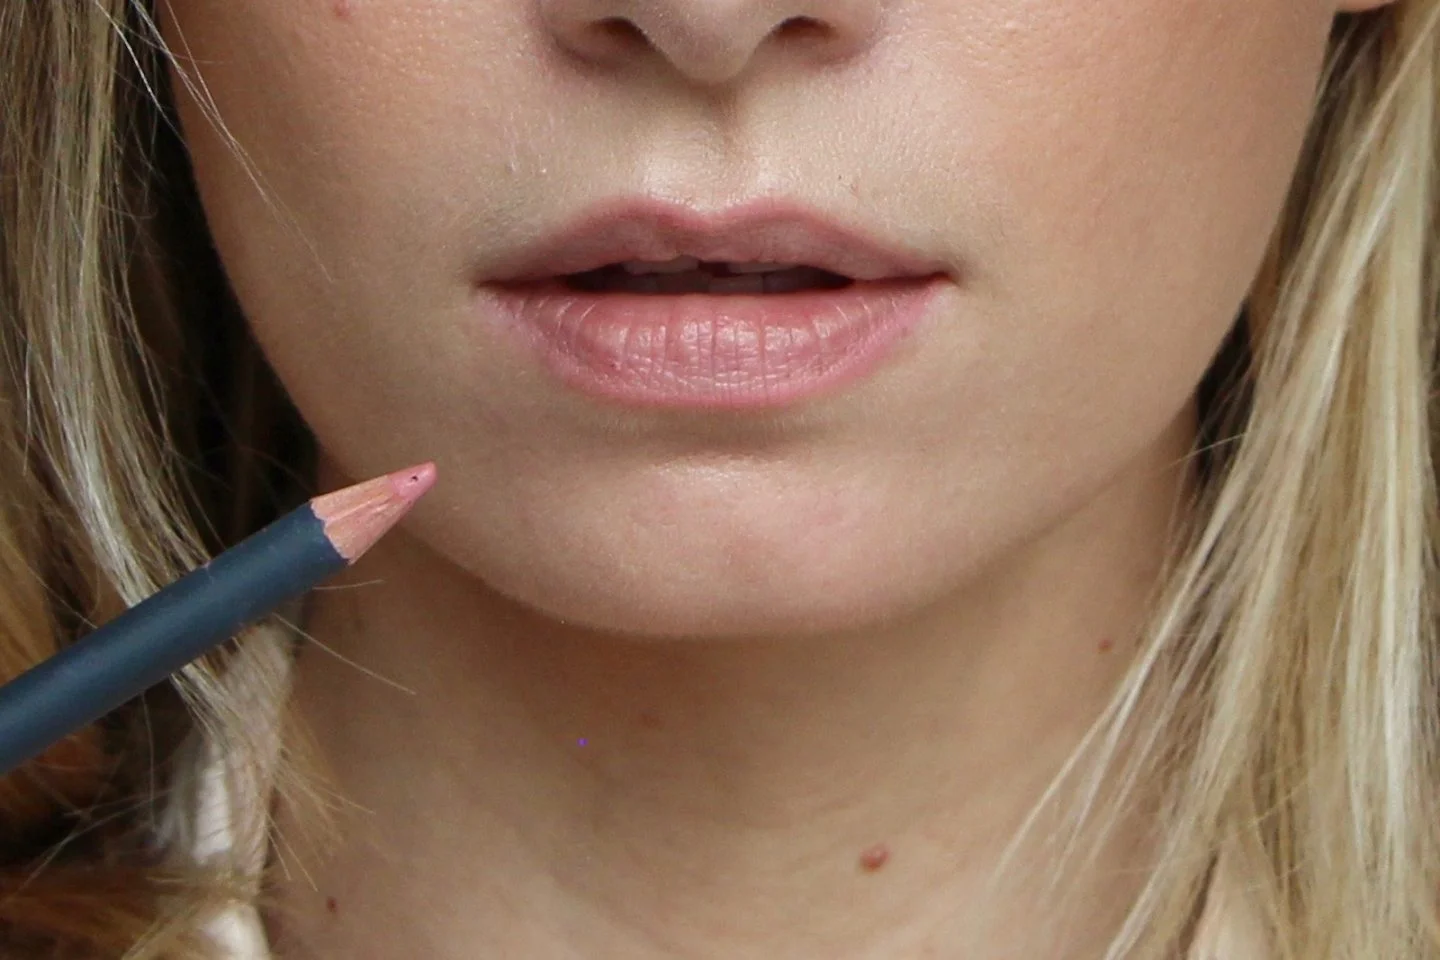 Does Lip Liner Make A Difference?